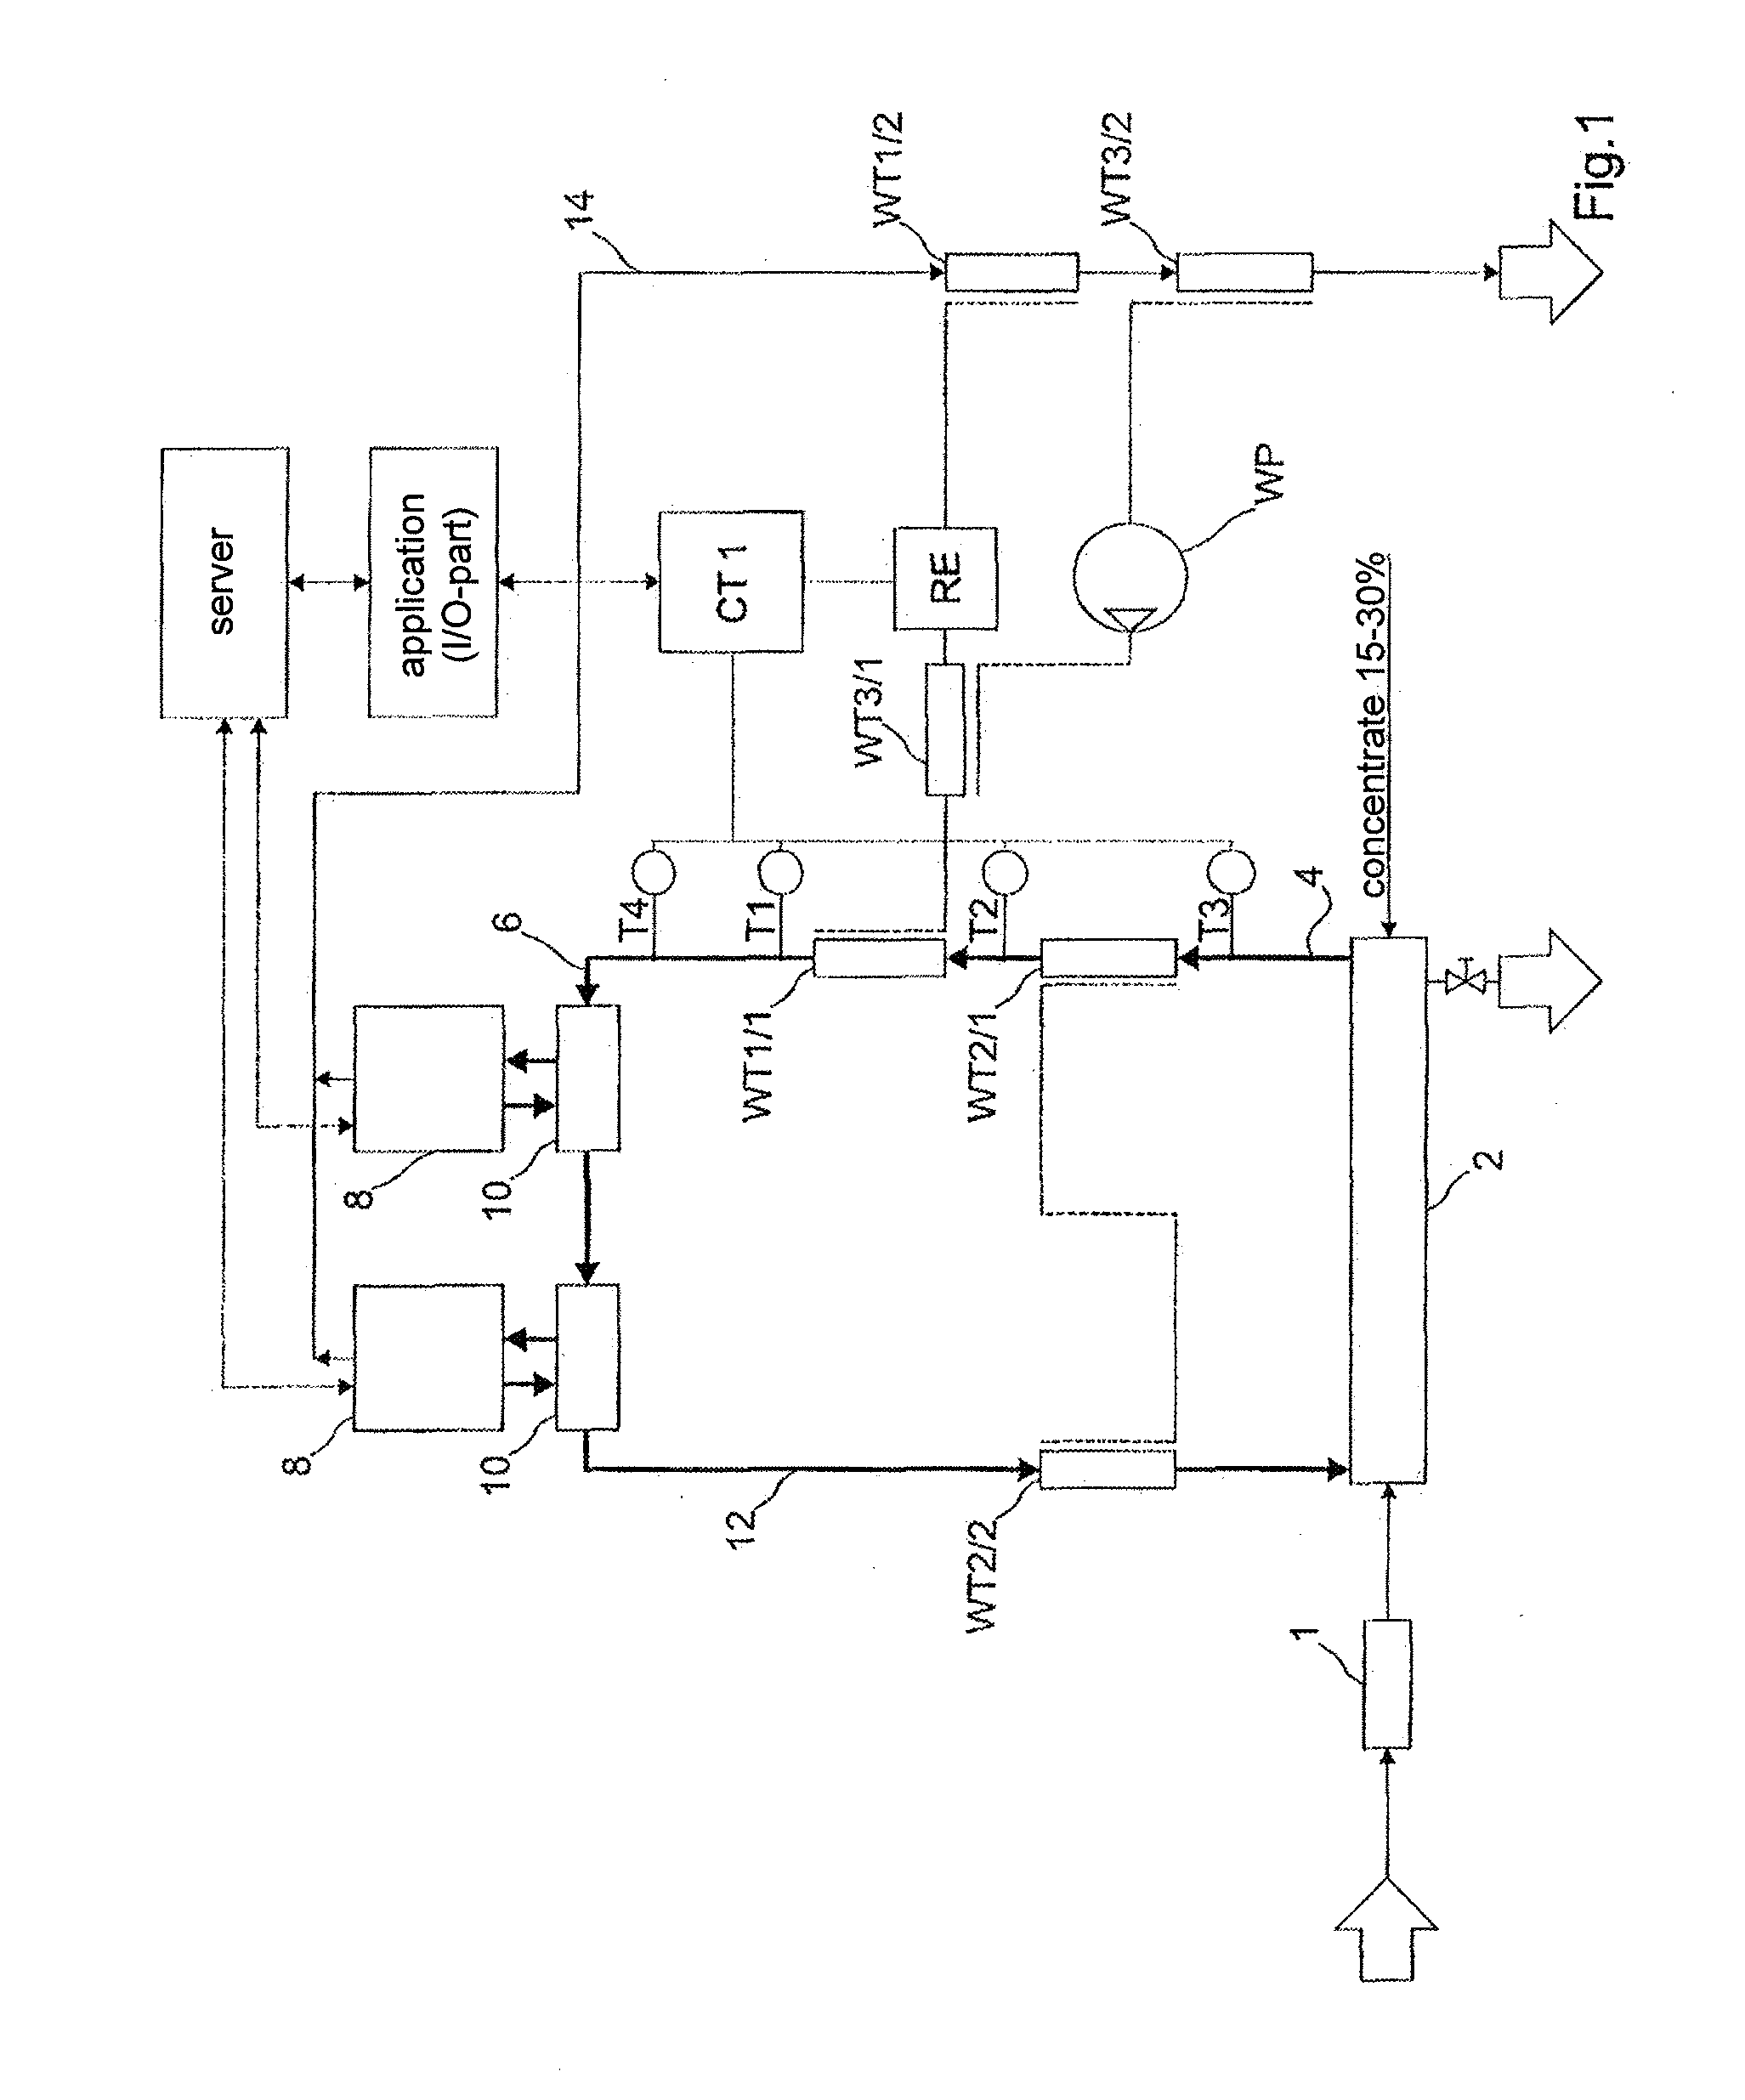 Extracorporeal blood treatment system with heat recovery